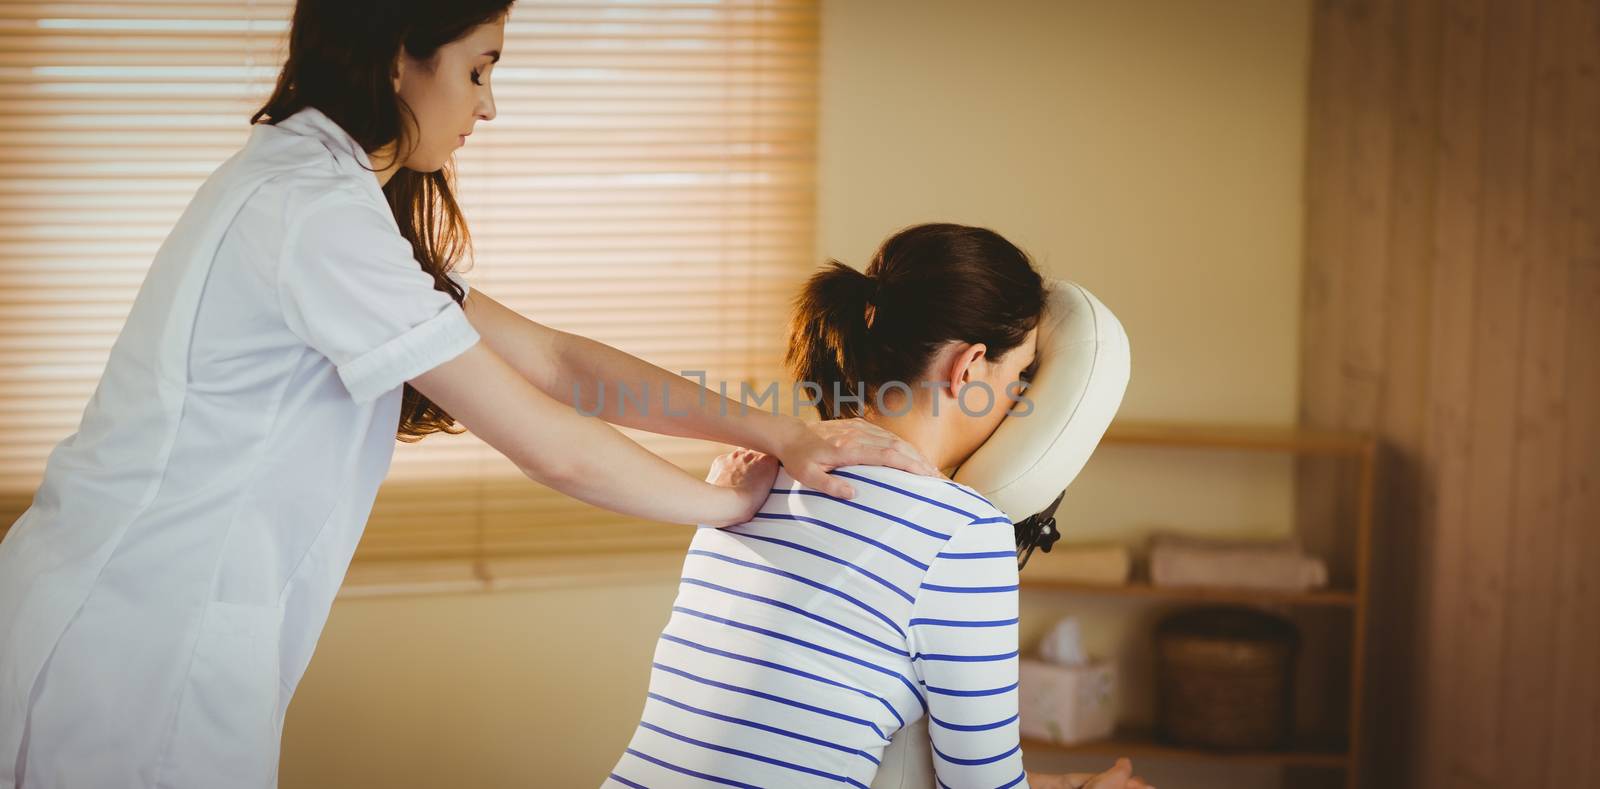 Young woman getting massage in chair in therapy room